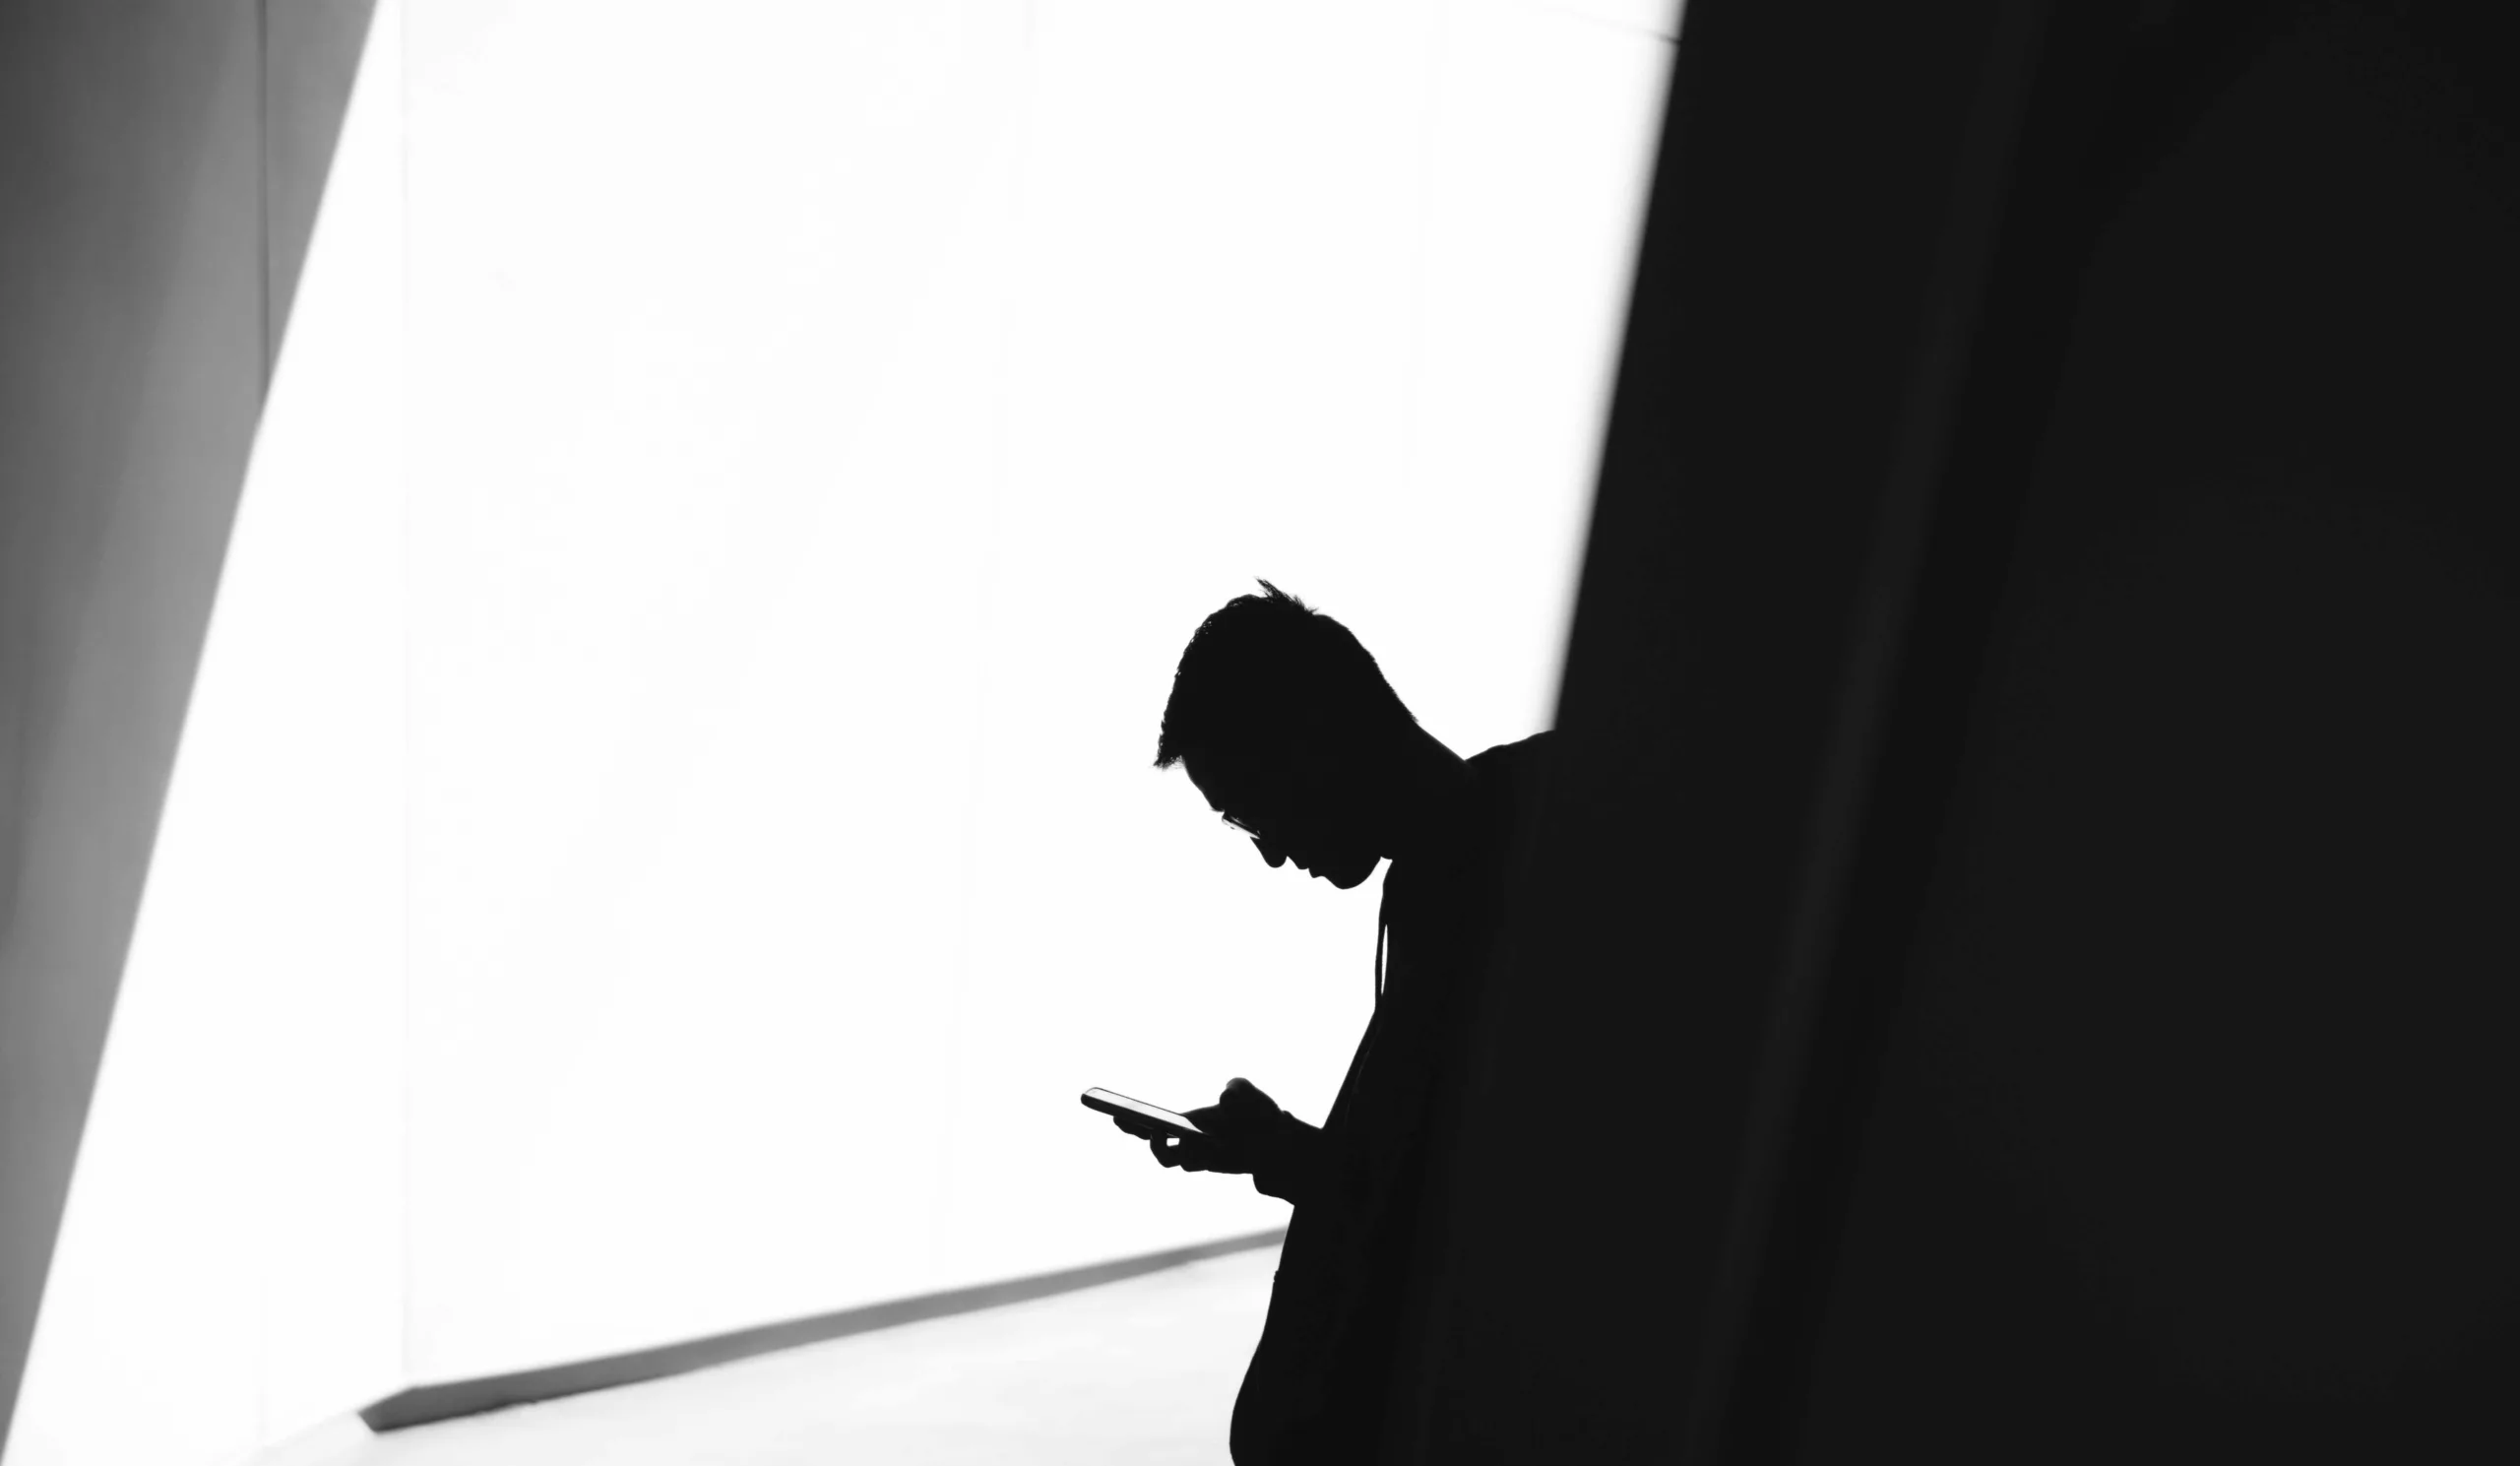 Silhouetted person using smartphone in high contrast black and white